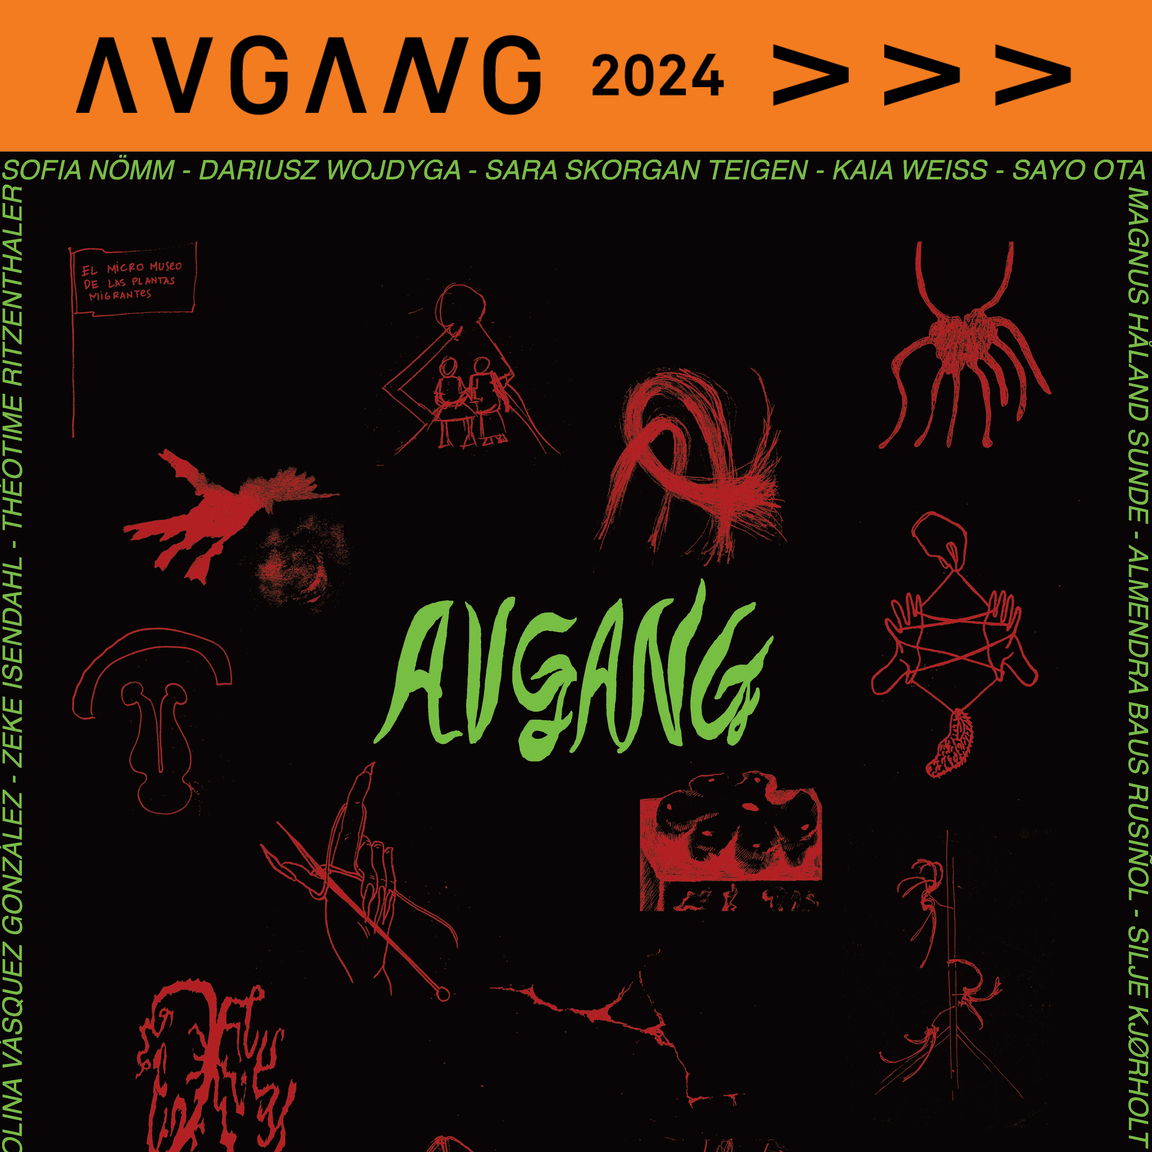 Avgang 2024: The World Is A Knot In Motion